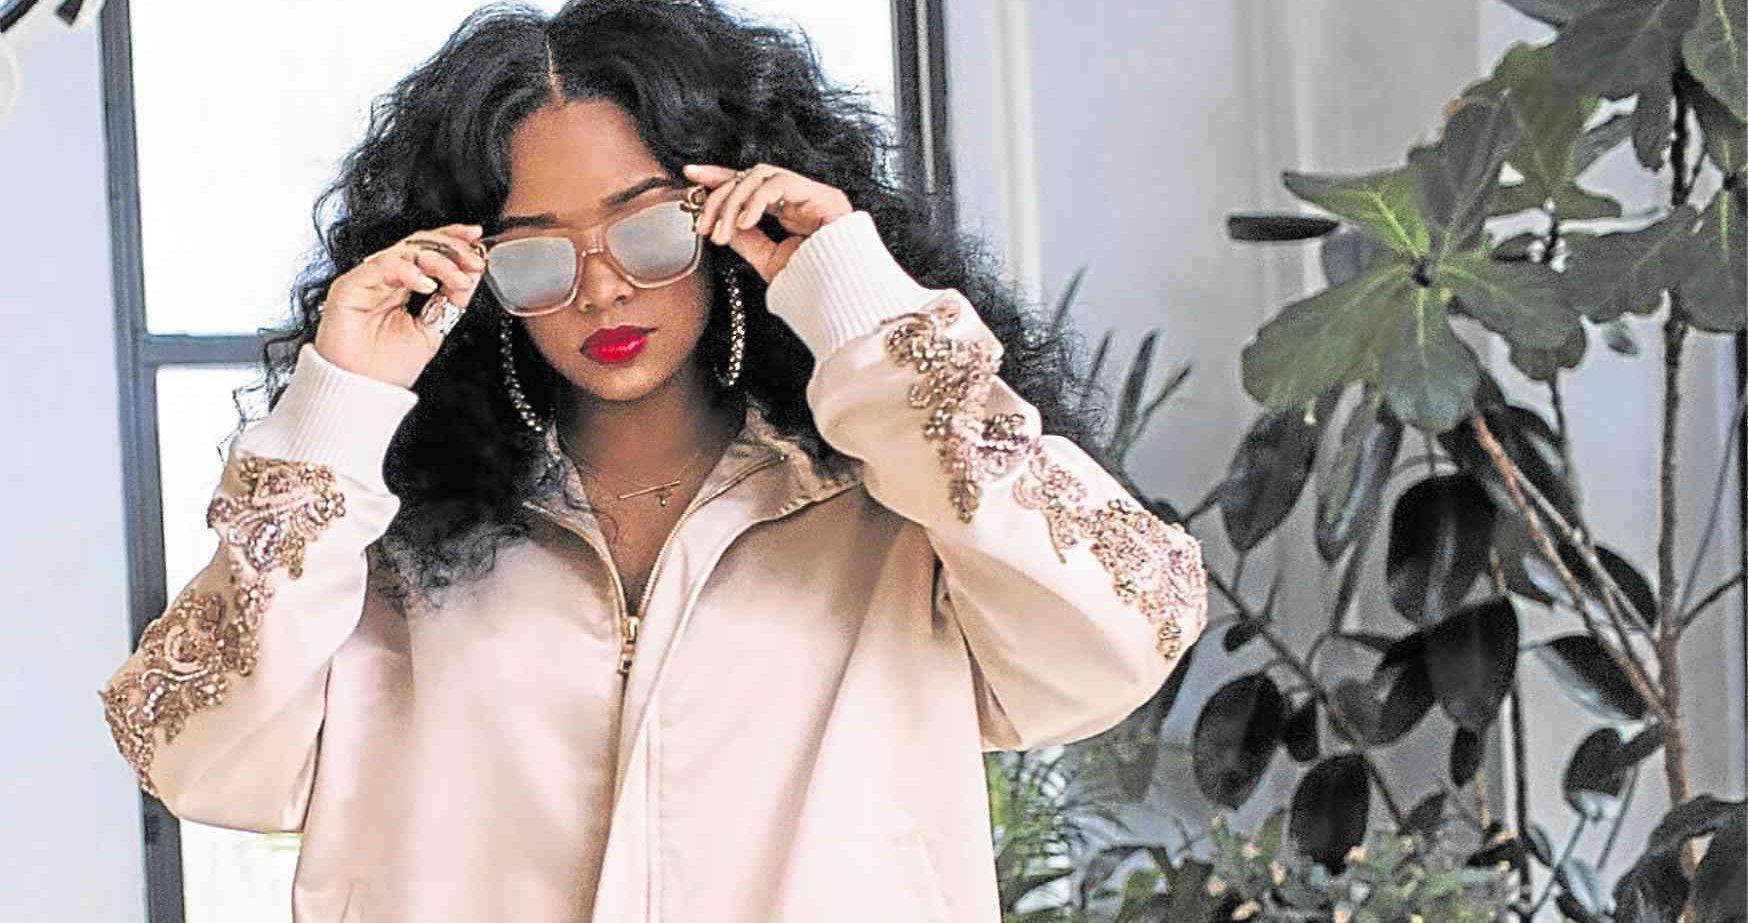 Fil-Am R&B singer H.E.R. reacts to 5 Grammy nominations